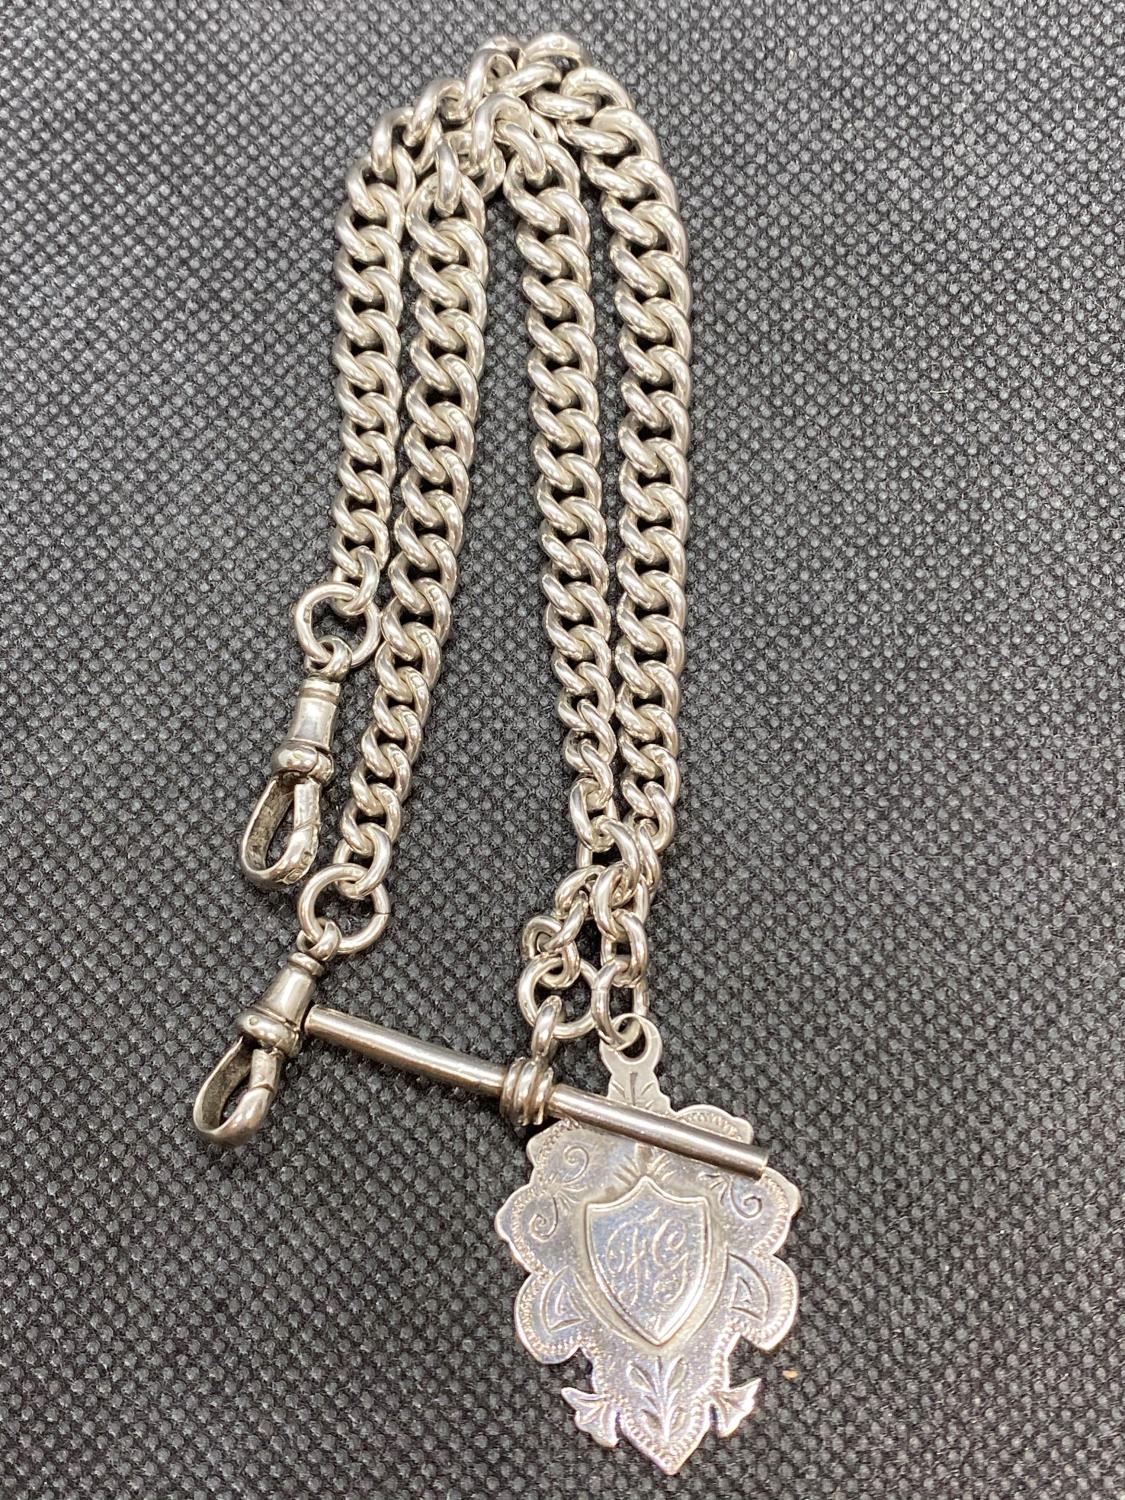 Antique silver double Albert chain and medal Birmingham 1903 55g - Image 2 of 3